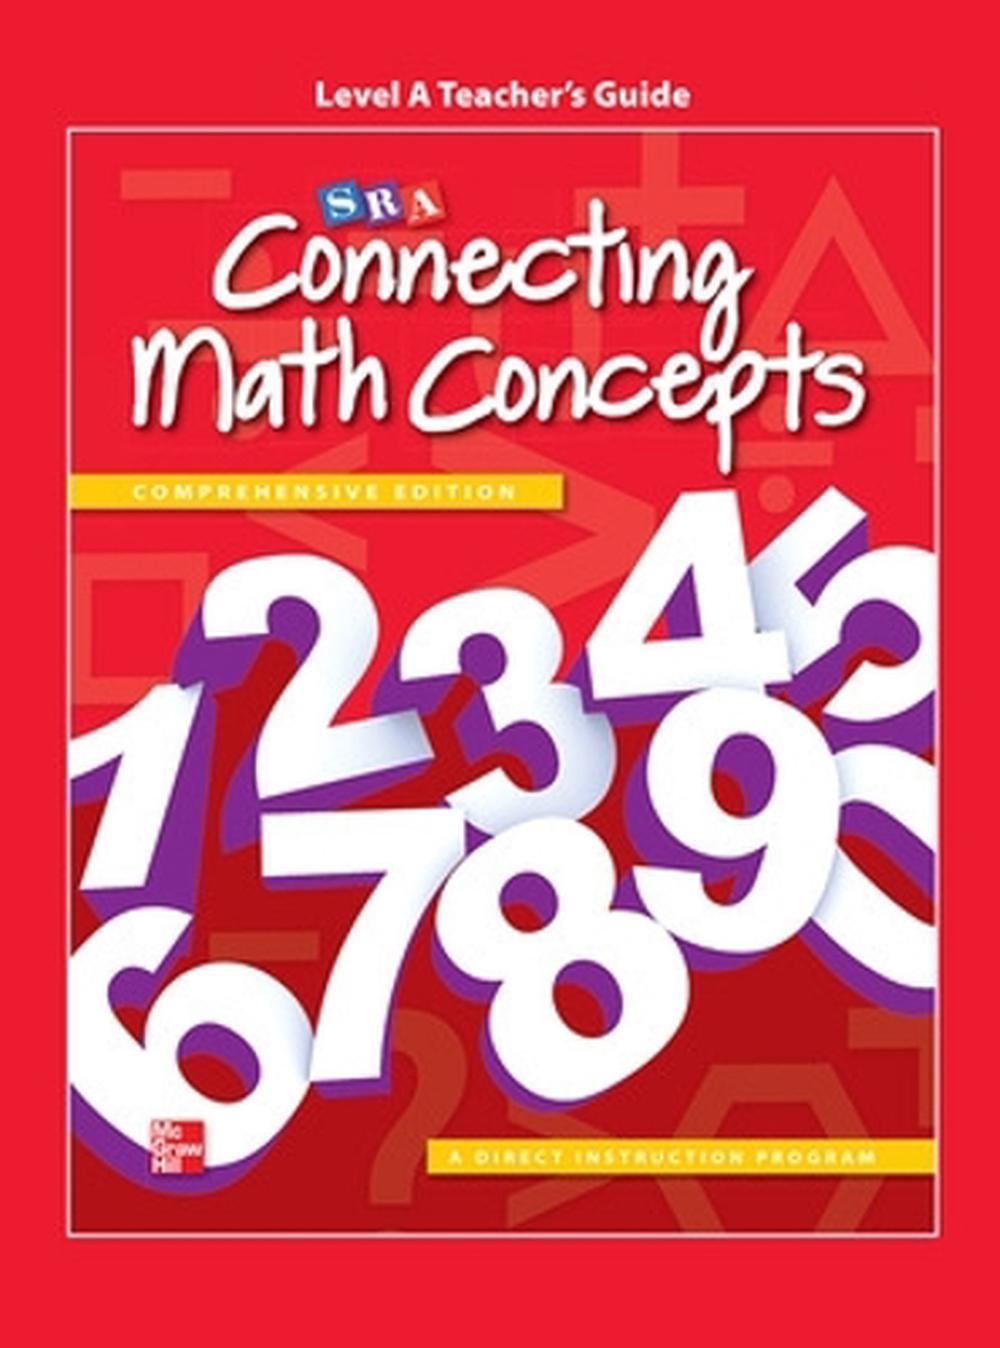 Level　Connecting　Math　online　9780076555727　Concepts　Nile　A,　Buy　Teacher's　Hill,　Guide　by　McGraw　Paperback,　at　The